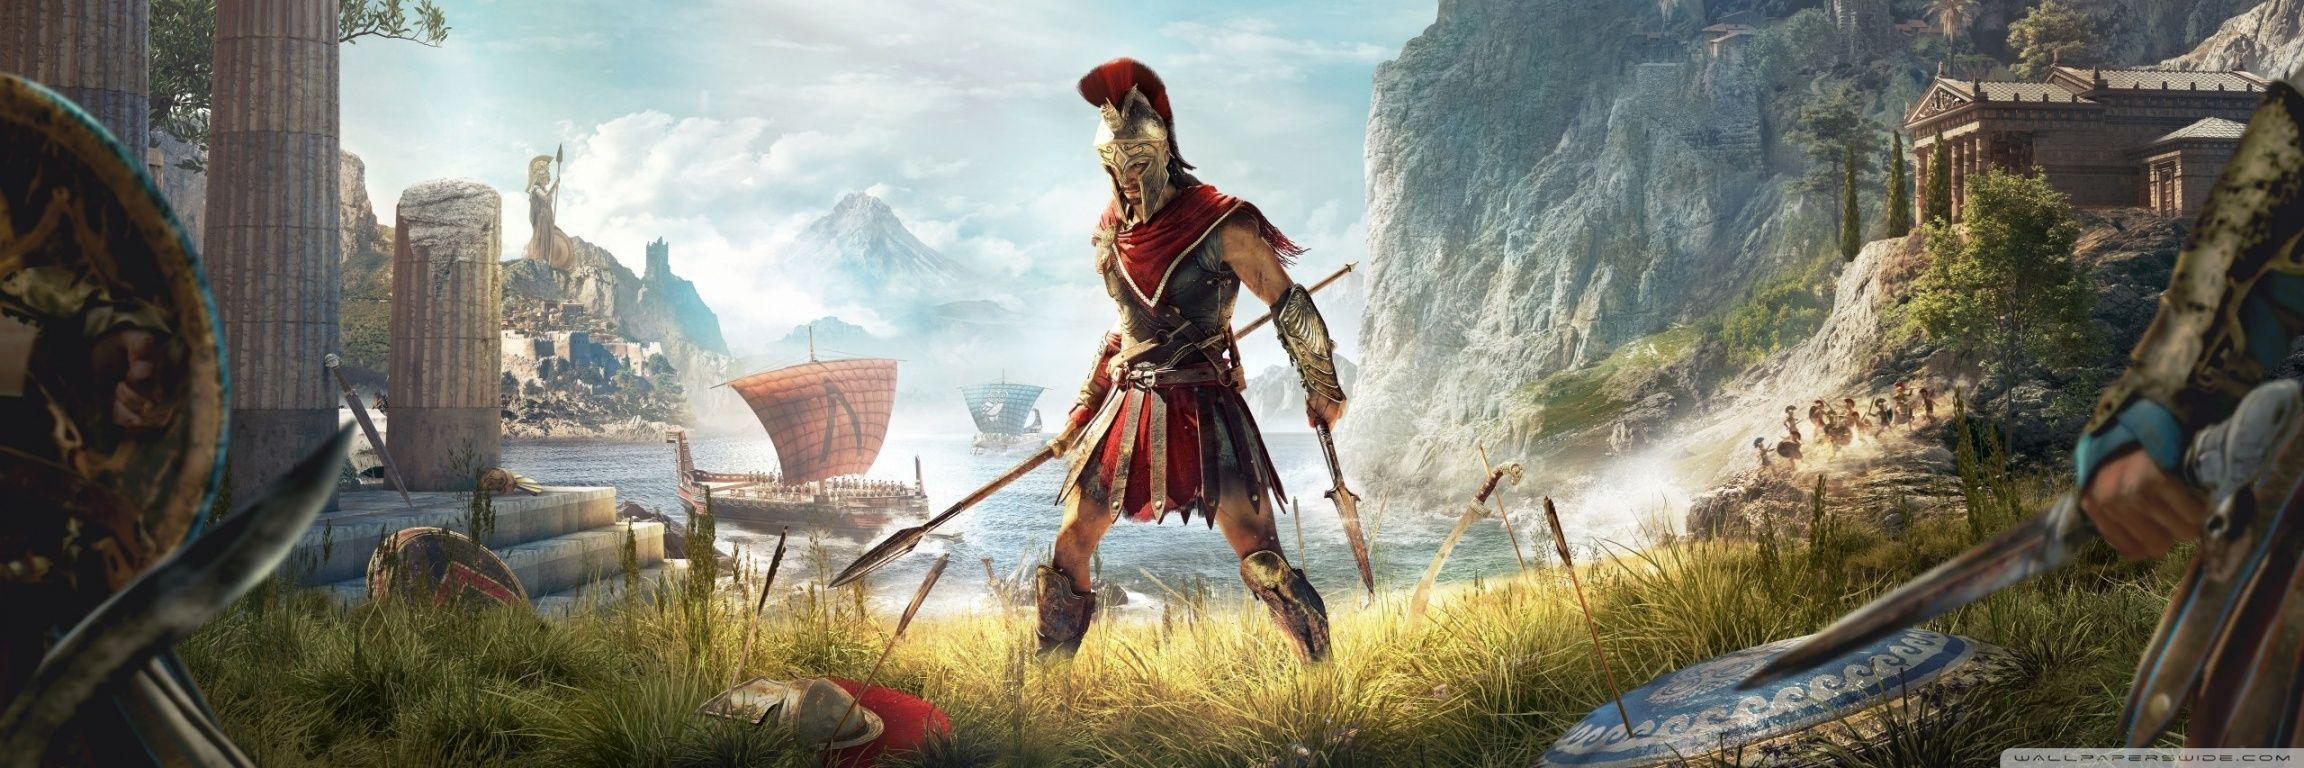 Assassin's Creed Odyssey ❤ 4K HD Desktop Wallpapers for • Wide